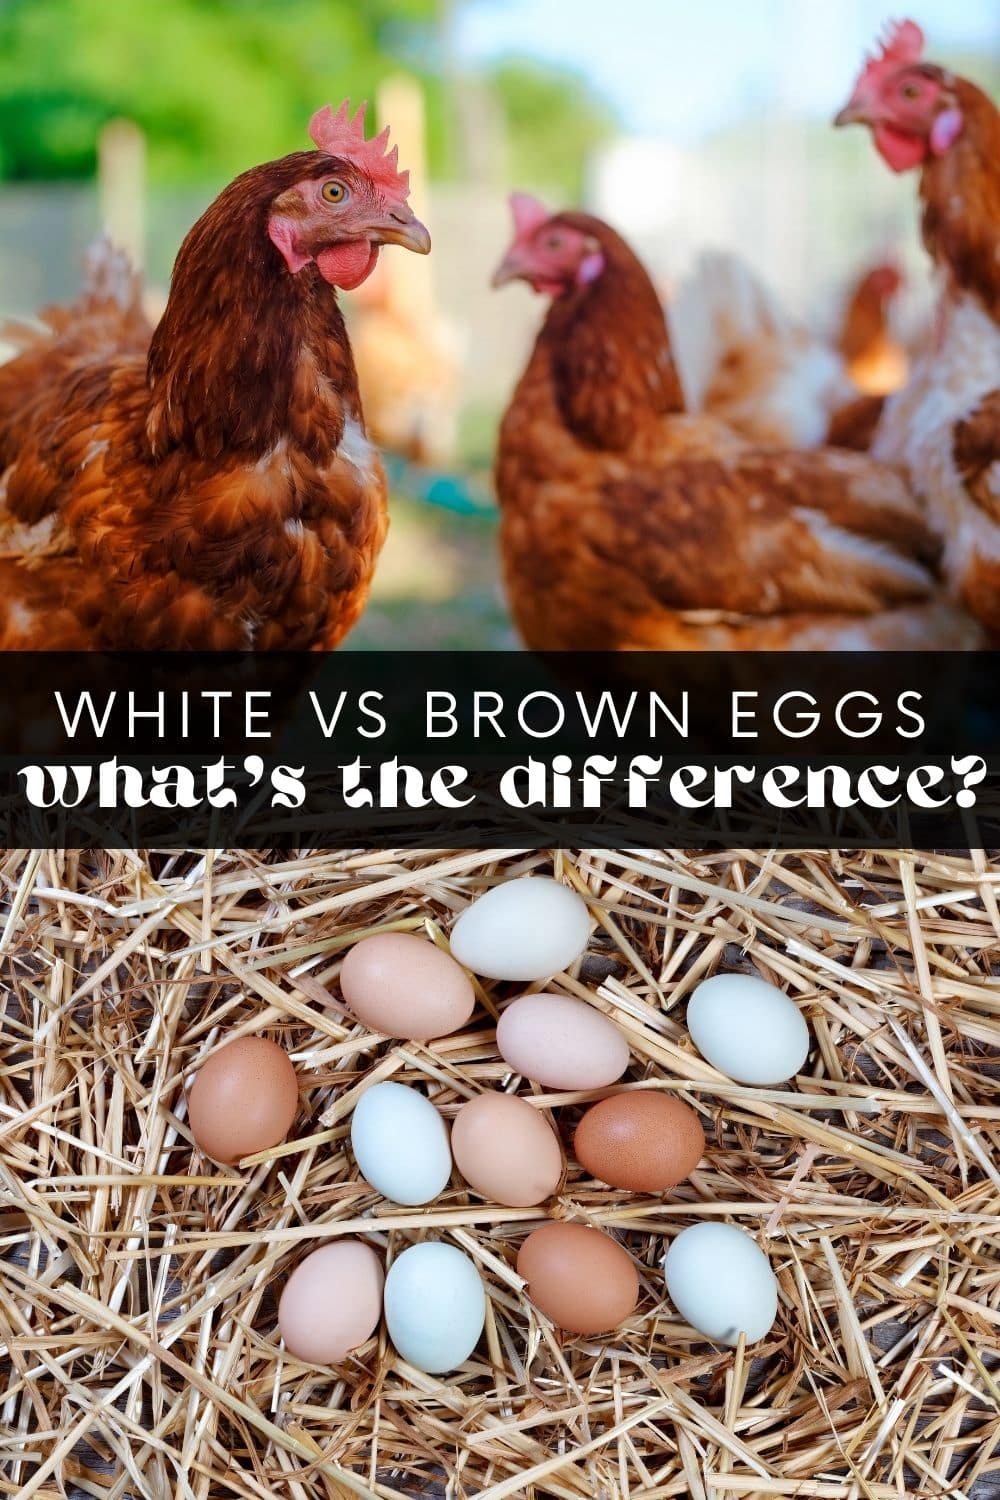 Have you ever wondered why some eggs are brown, and others are white? If so, the difference (or lack thereof!) between these eggs might surprise you! Let's settle this debate once and for all: brown vs white eggs - which is better?